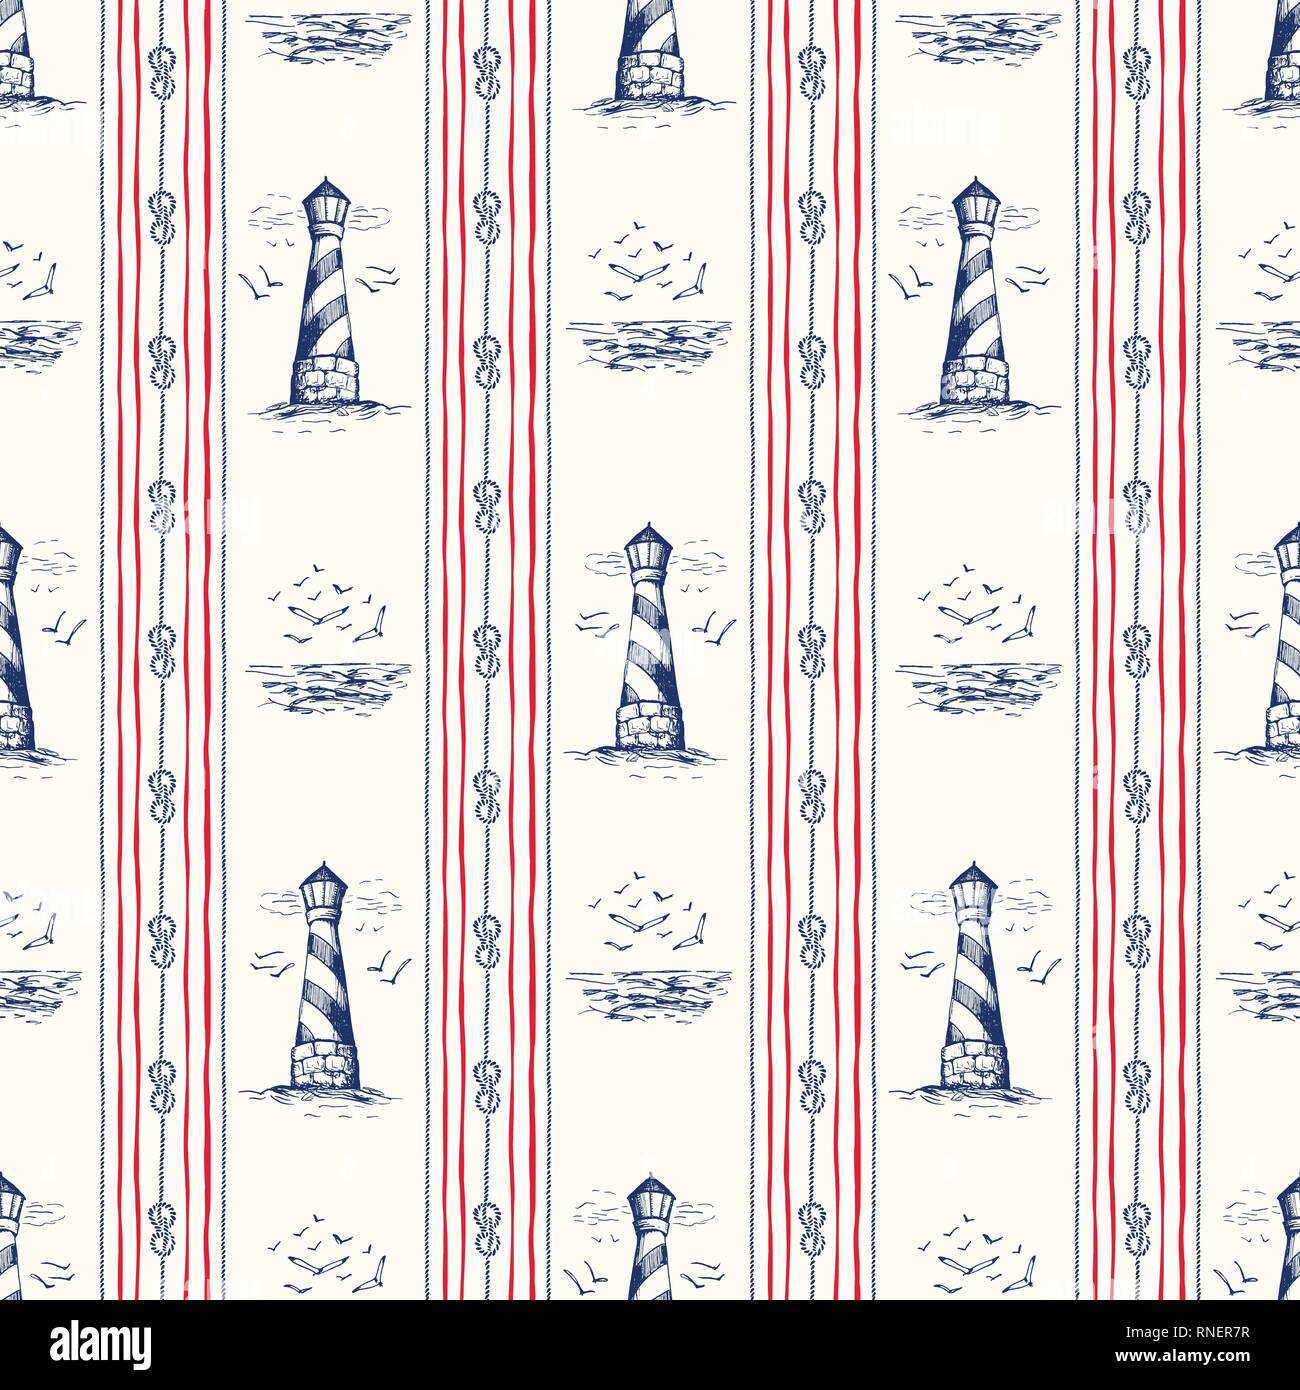 Vintage Hand-Drawn Rope Vertical Stripes with Lighthouse, Seagulls Scenery and Zeppelin Bend Nautical Knots Vector Seamless Pattern Blue and Red Marin Stock Vector